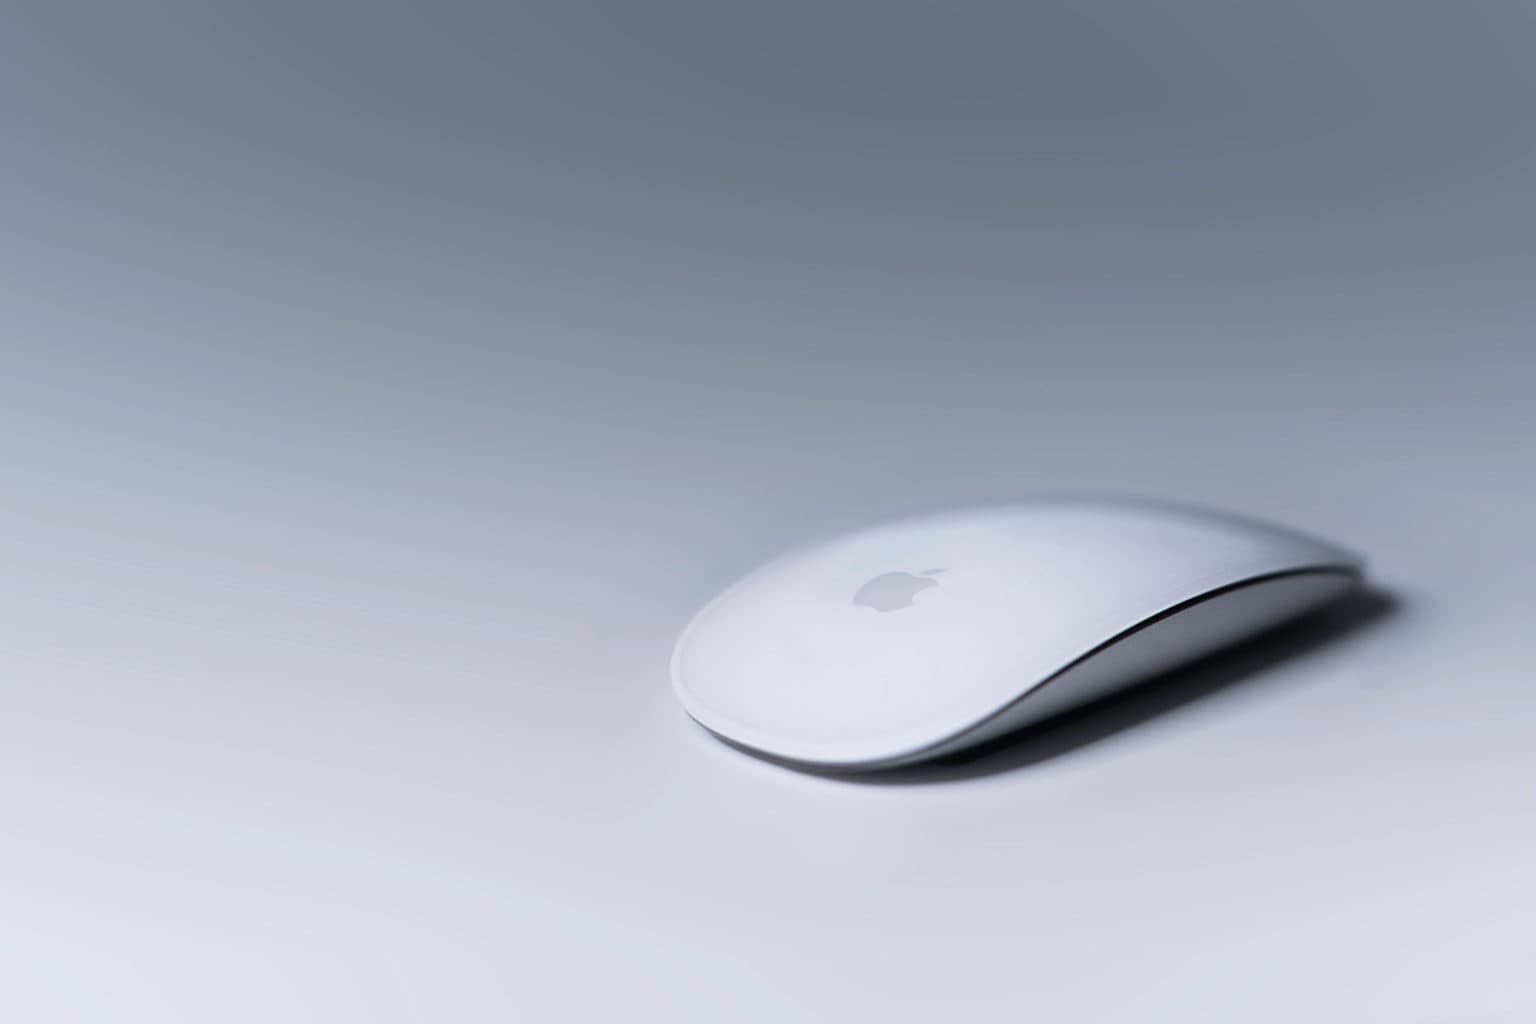 Even the Magic Mouse combines touch, drag and drop better than the iPad.